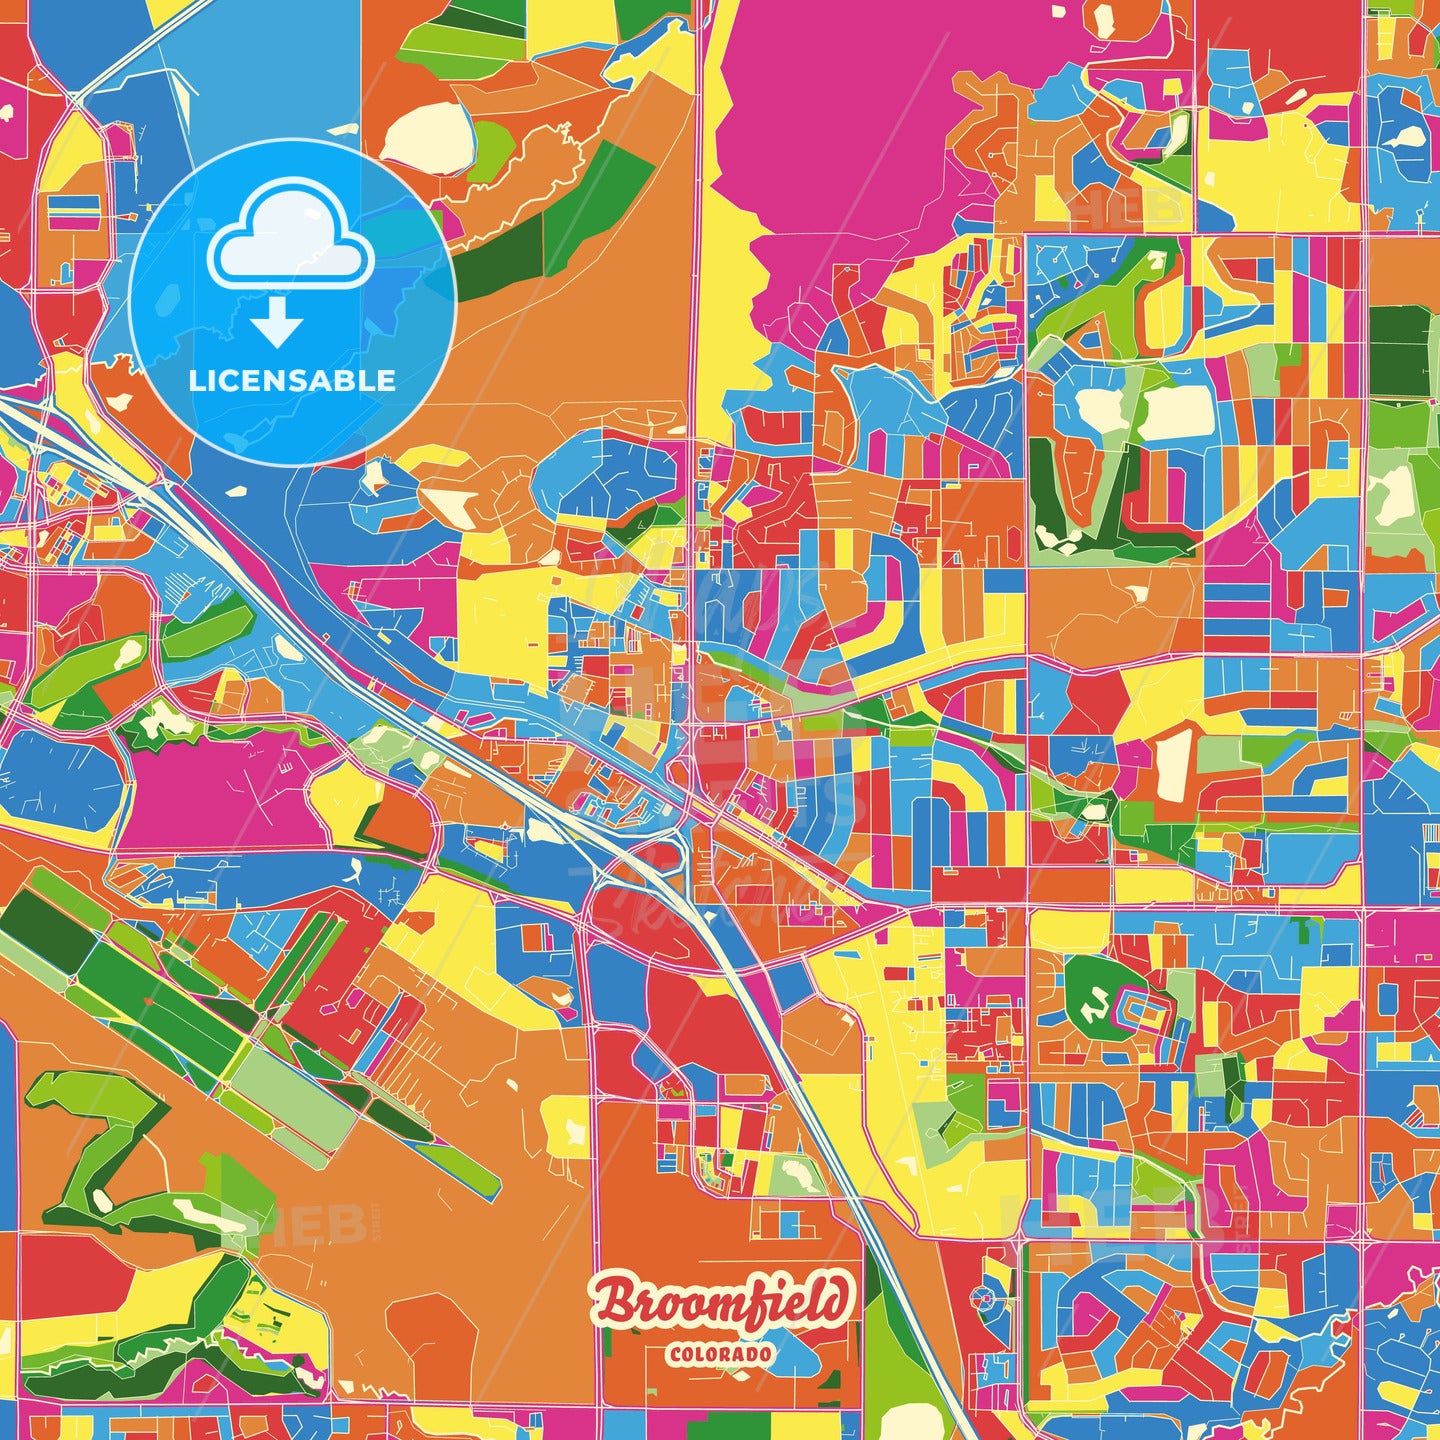 Broomfield, United States Crazy Colorful Street Map Poster Template - HEBSTREITS Sketches